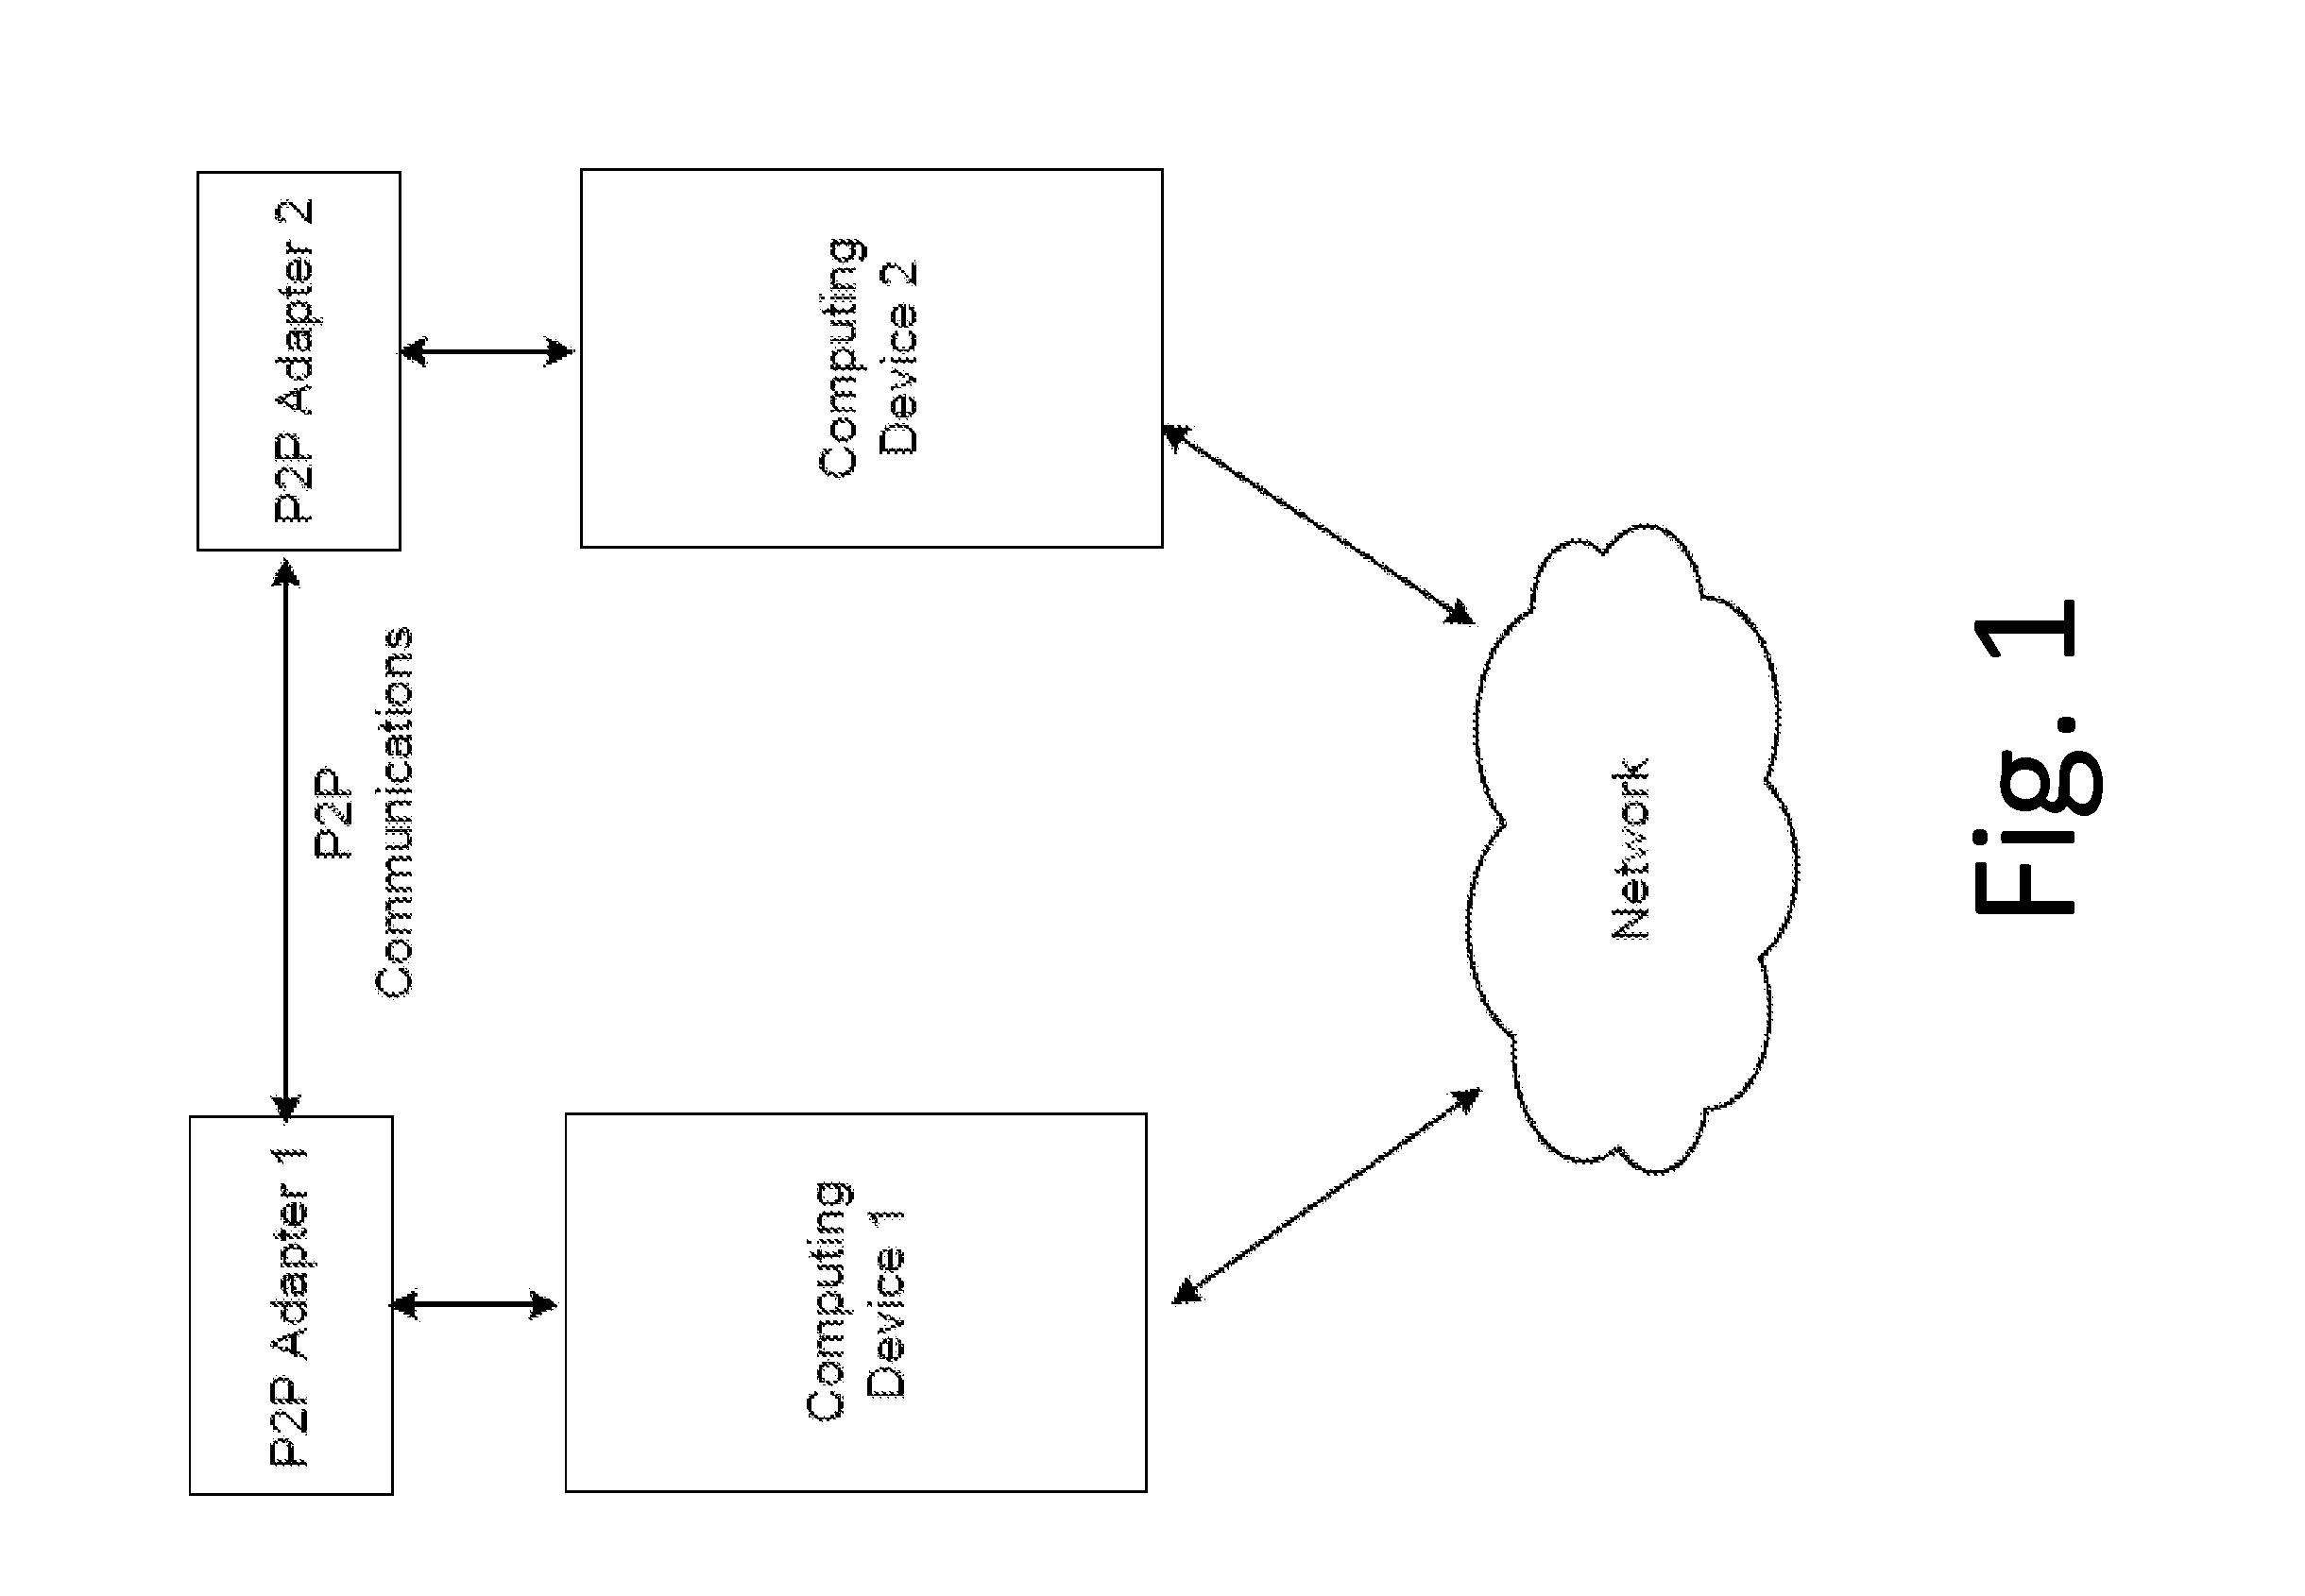 System and method for digital communication between computing devices